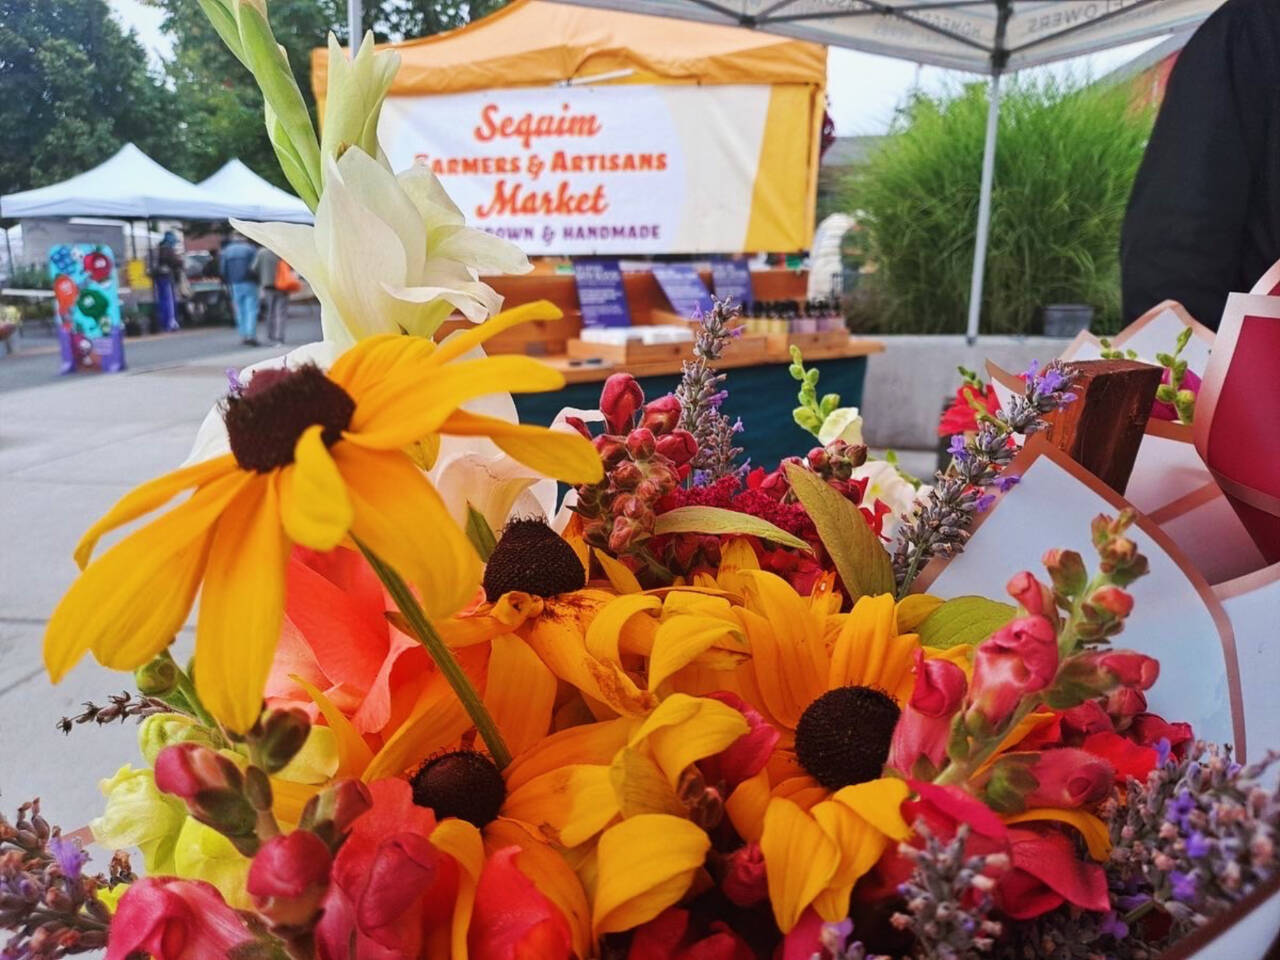 Photo by Aaron Brown/Sequim Farmers & Artisans Market / A host of community partners helps the Sequim Farmers & Artisans Market bloom each year.